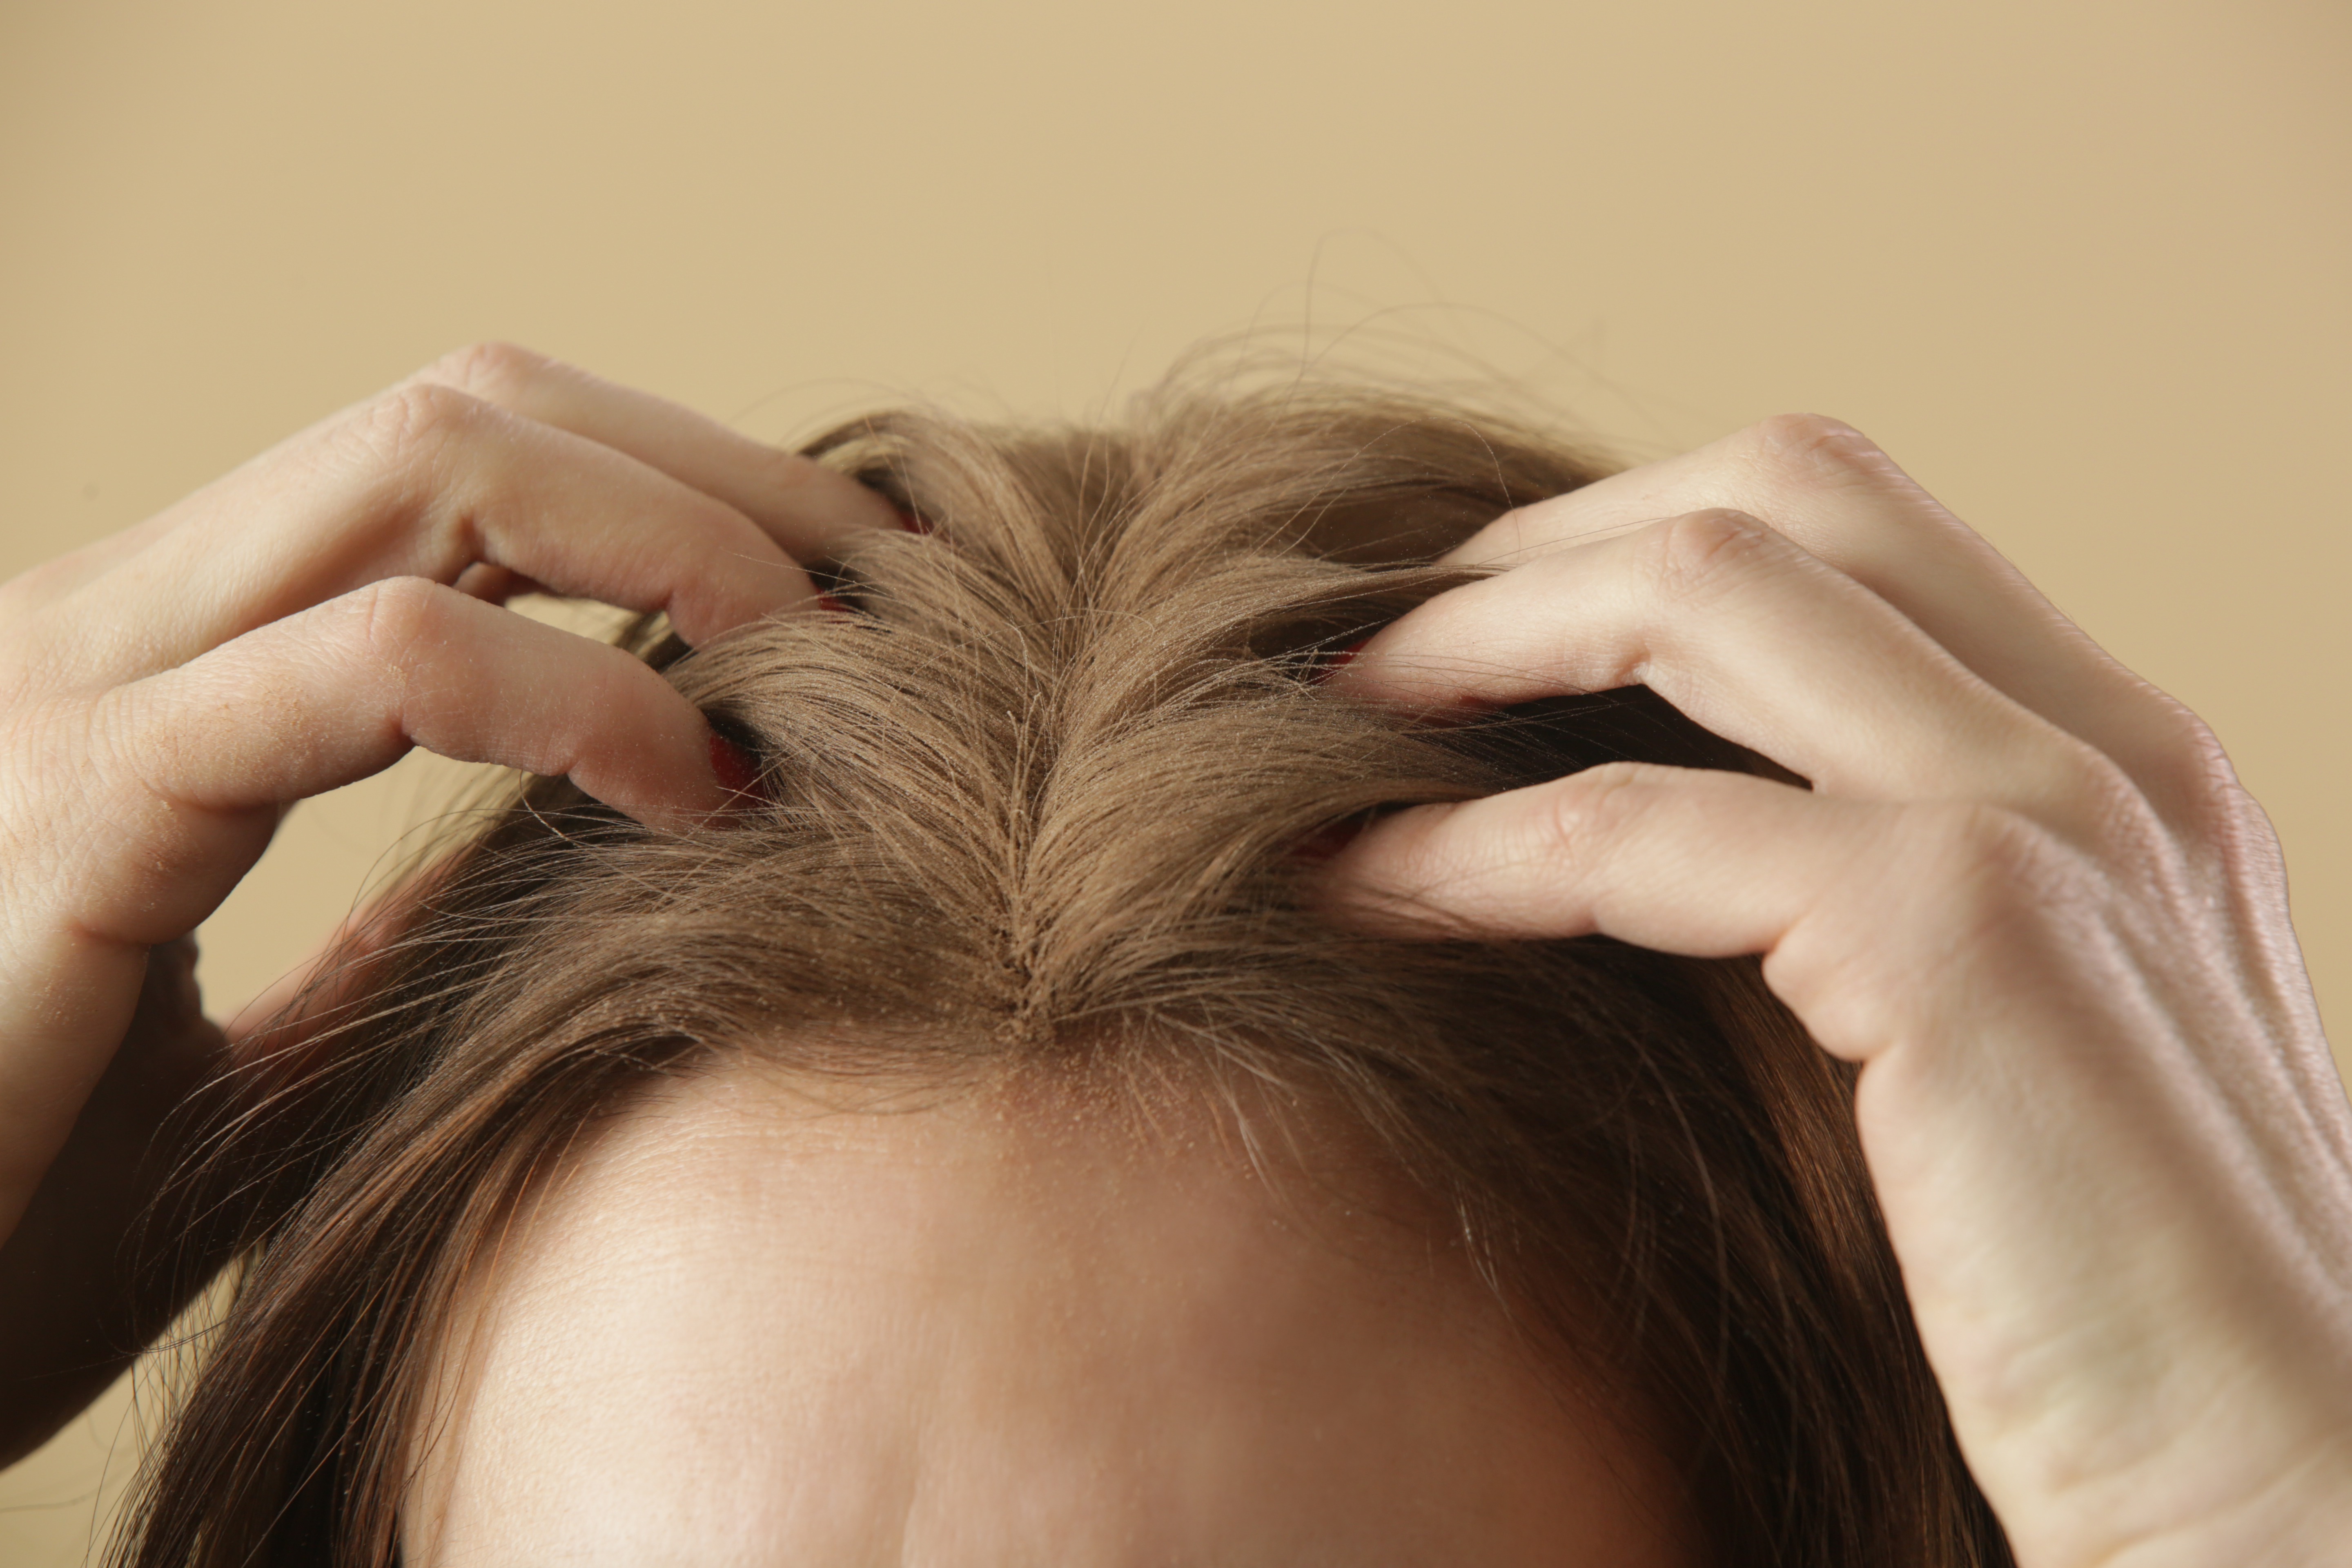 Photo of a woman massaging dry shampoo into her scalp | Source: Getty Images